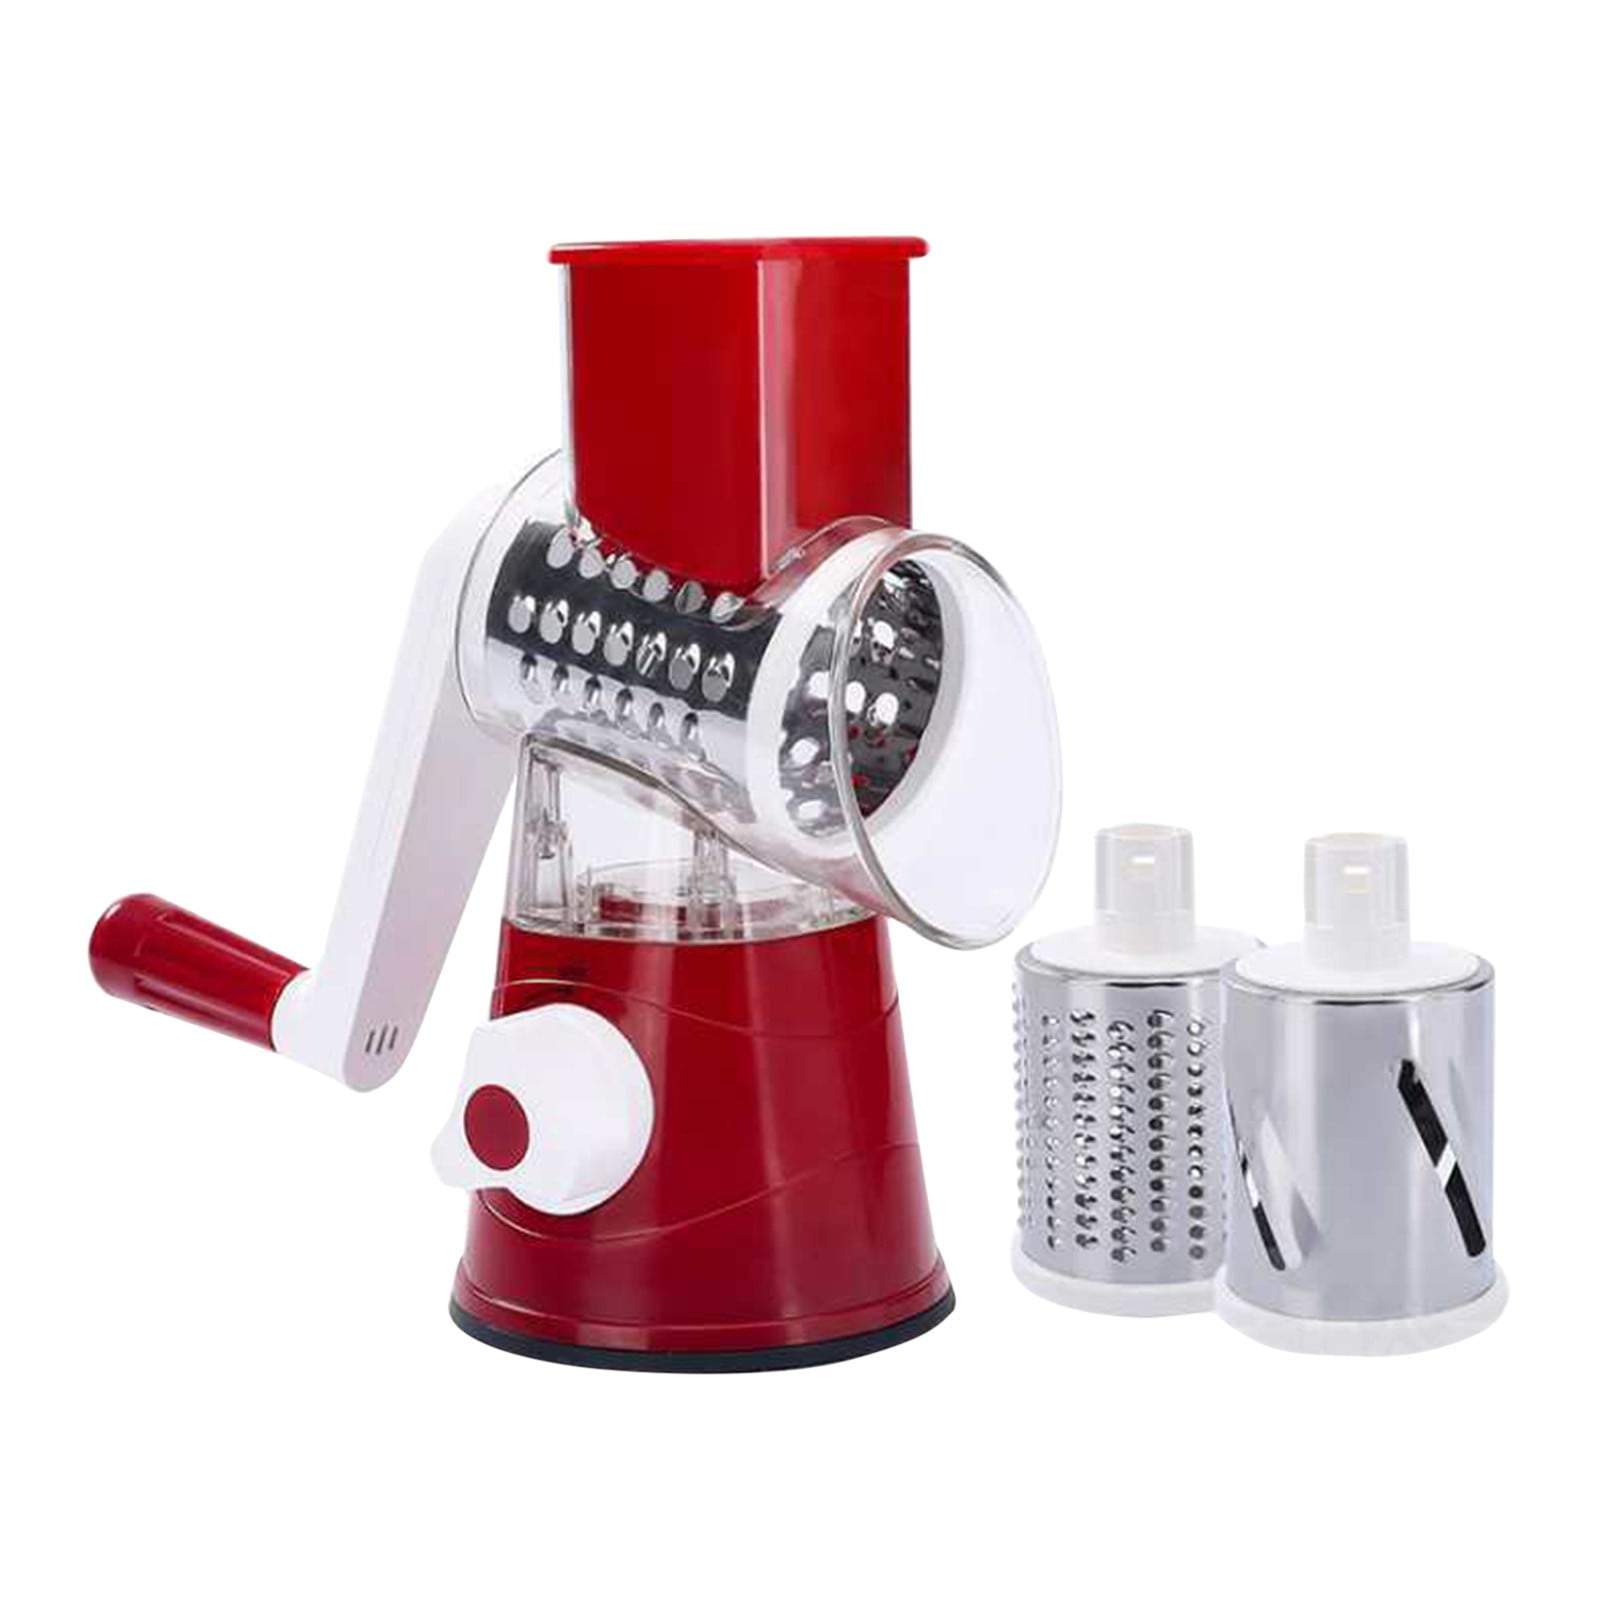 Health Craft Kitchen Machine Rotary Food Cutter and Cheese Grater